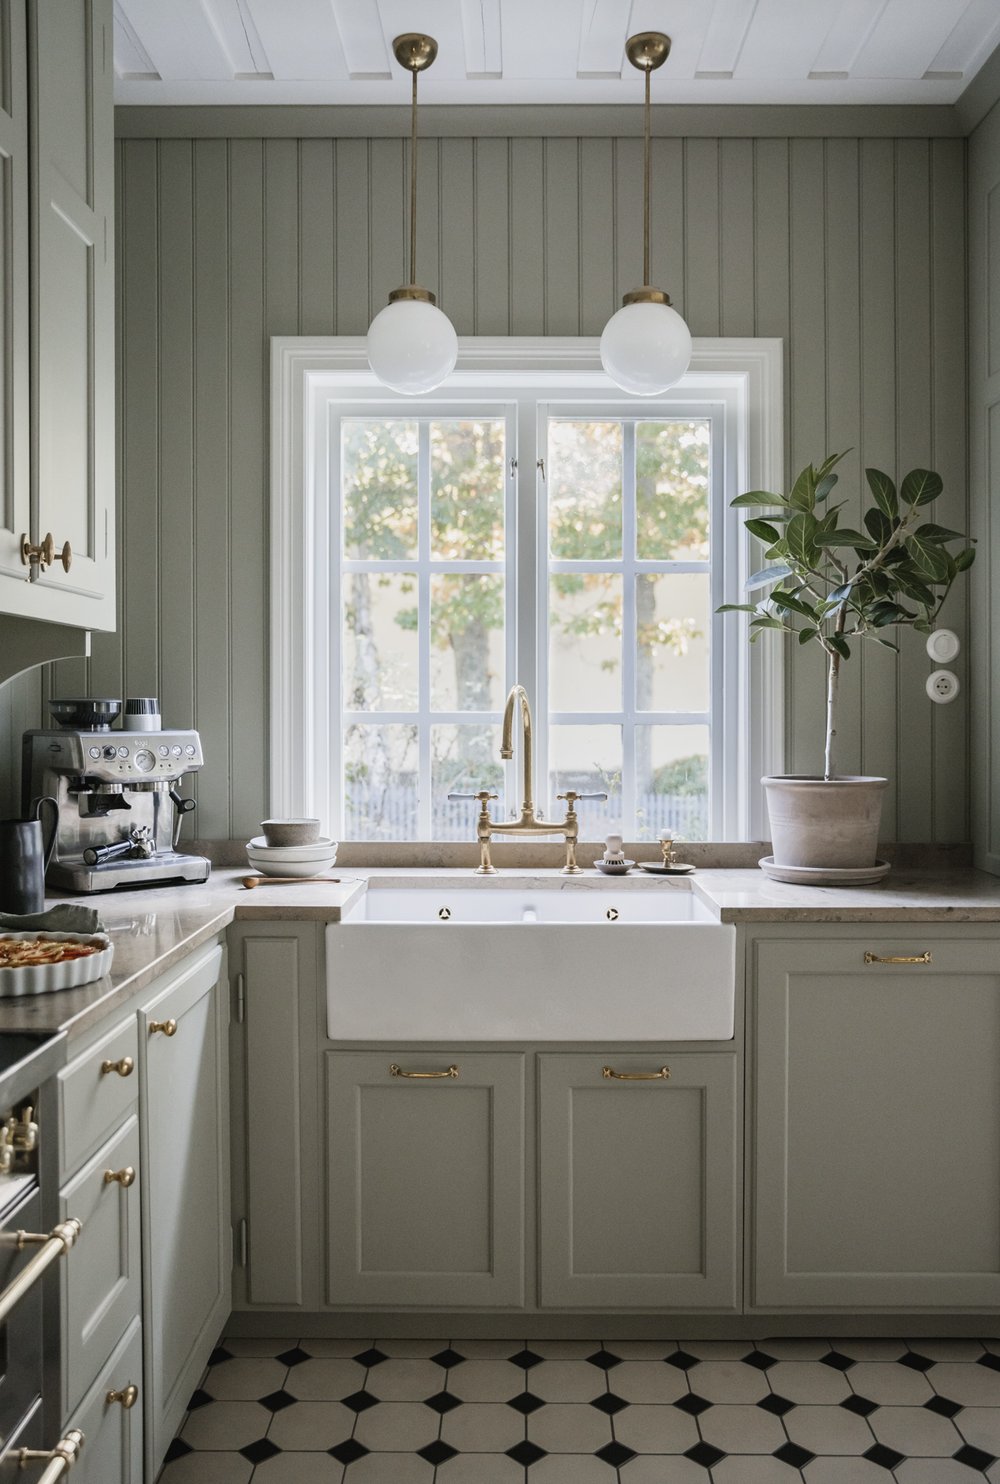 14 inspiring kitchens with sage green cabinets - COCO LAPINE DESIGN